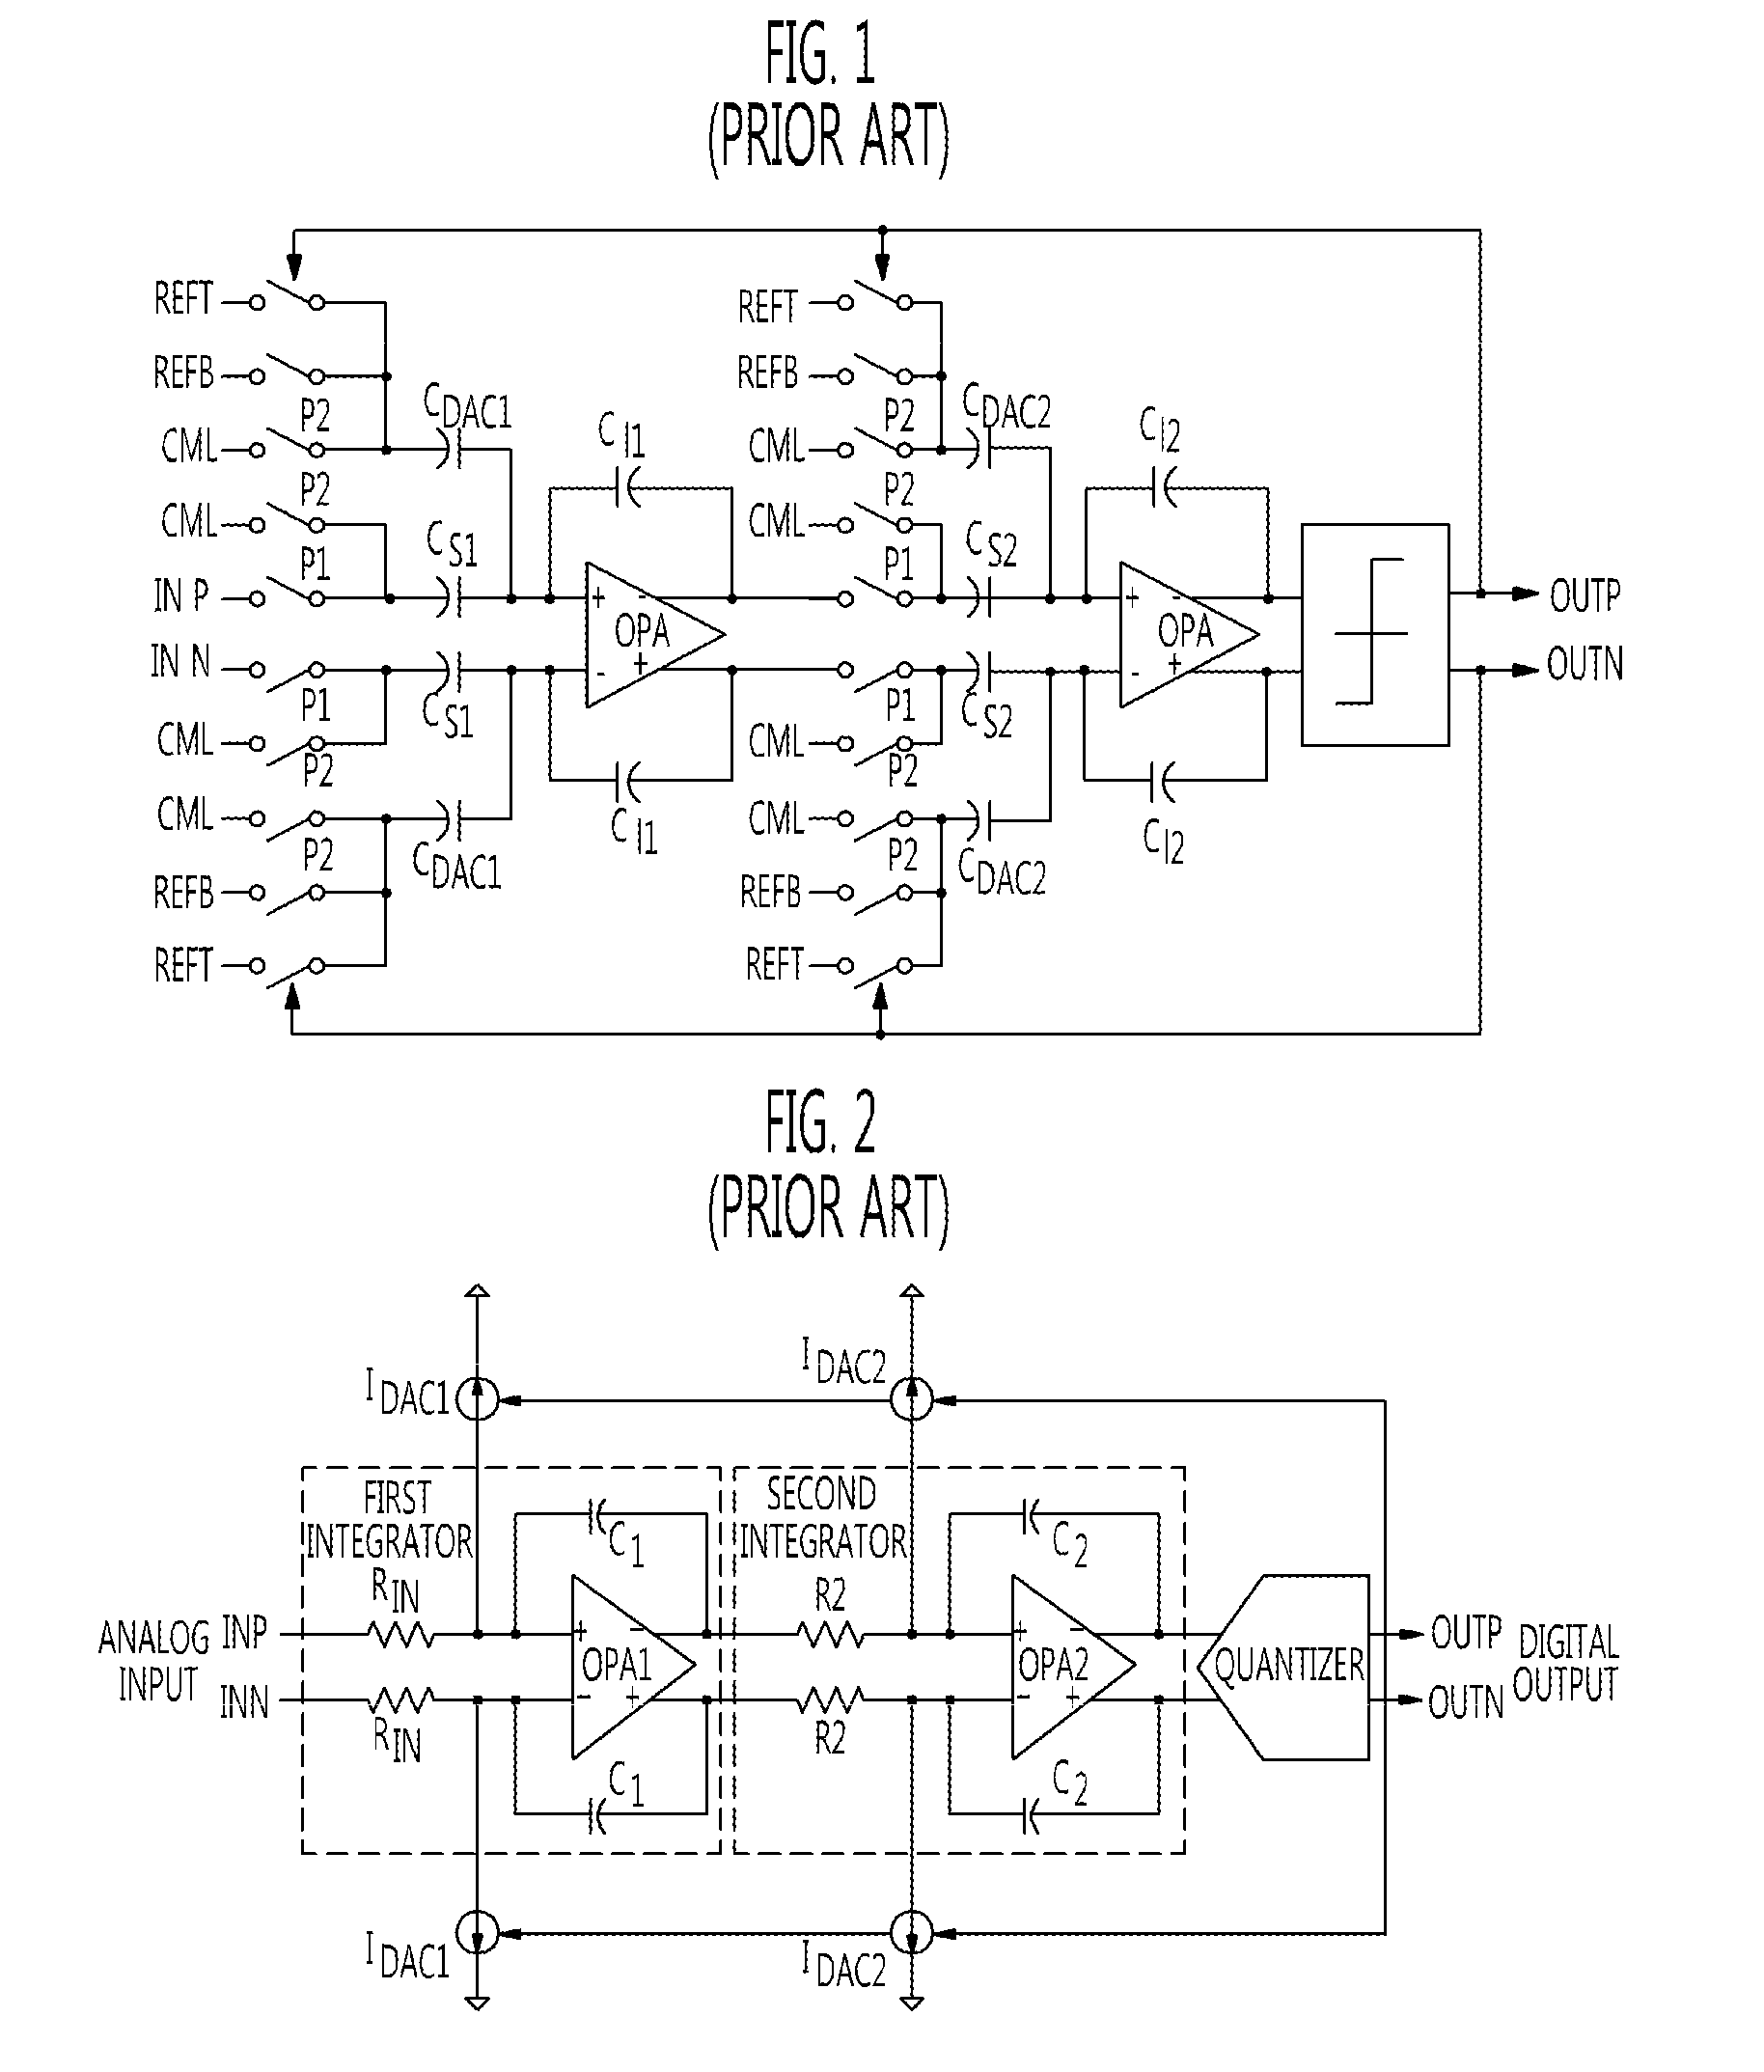 Active resistance-capacitor integrator and continuous-time sigma-delta modulator with gain control function